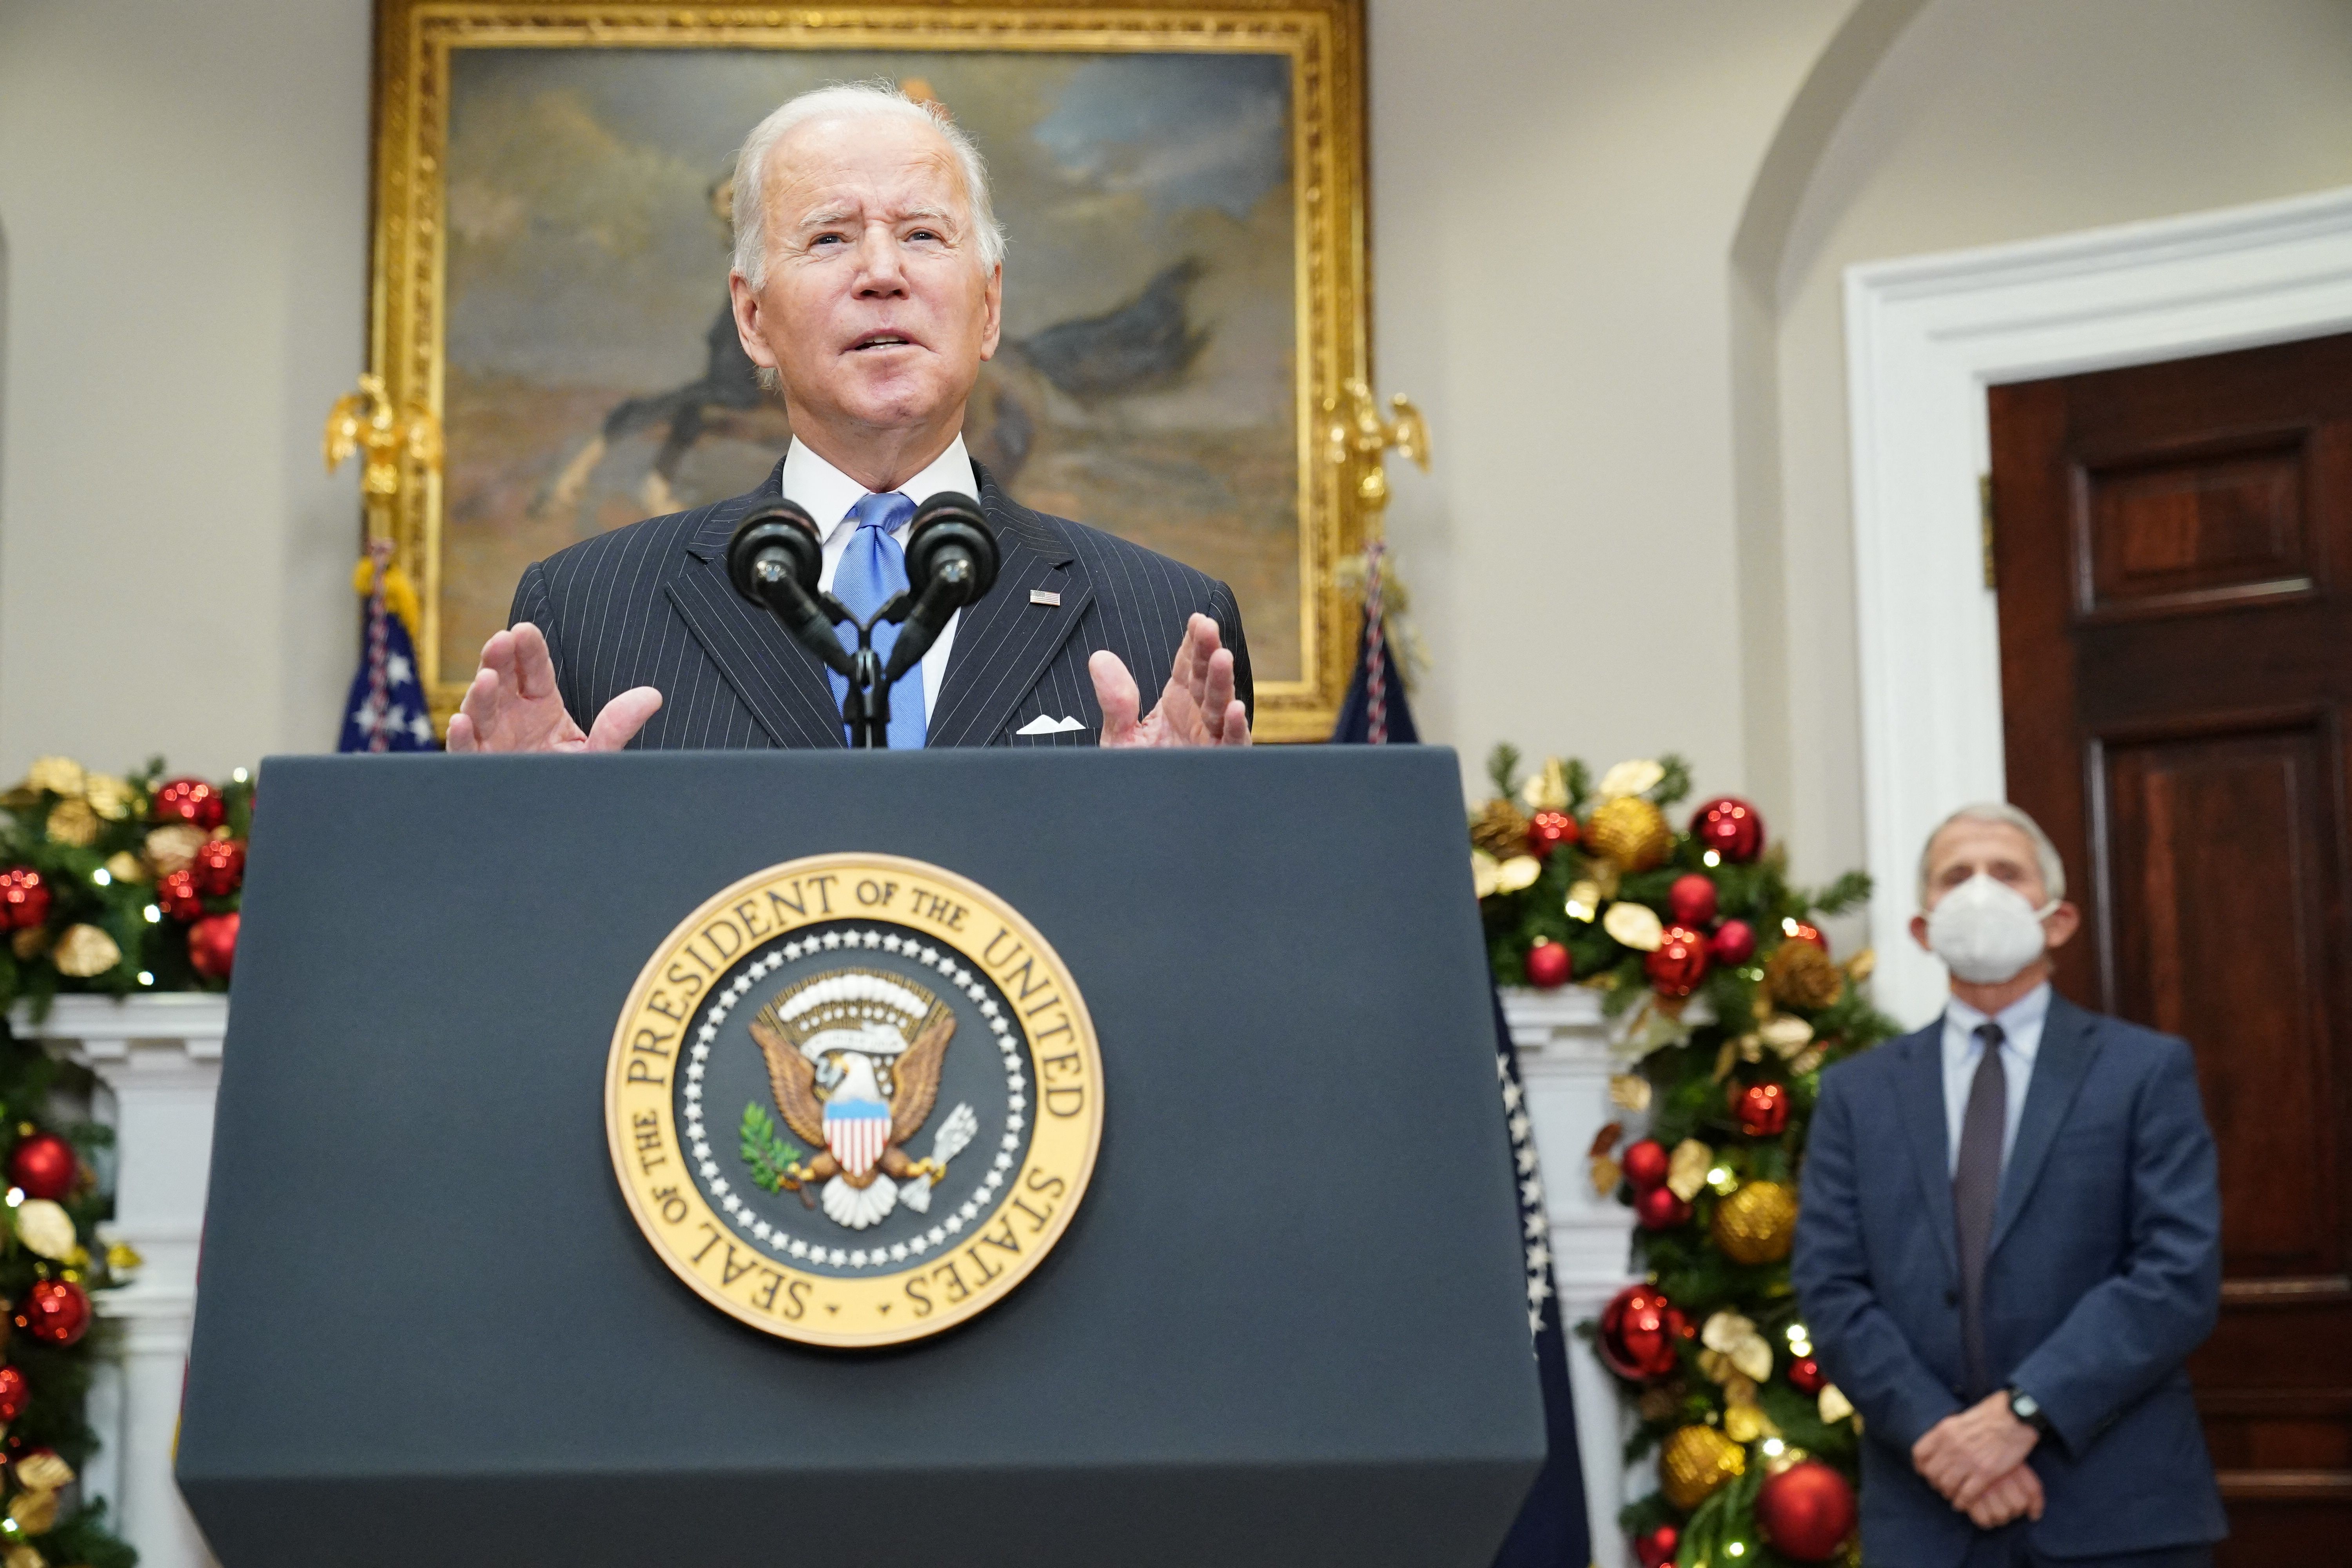 US President Joe Biden, flanked by Dr. anthony Fauci (R), delivers remarks to provide an update on the Omicron variant in the Roosevelt Room of the White House in Washington, DC on November 29, 2021.